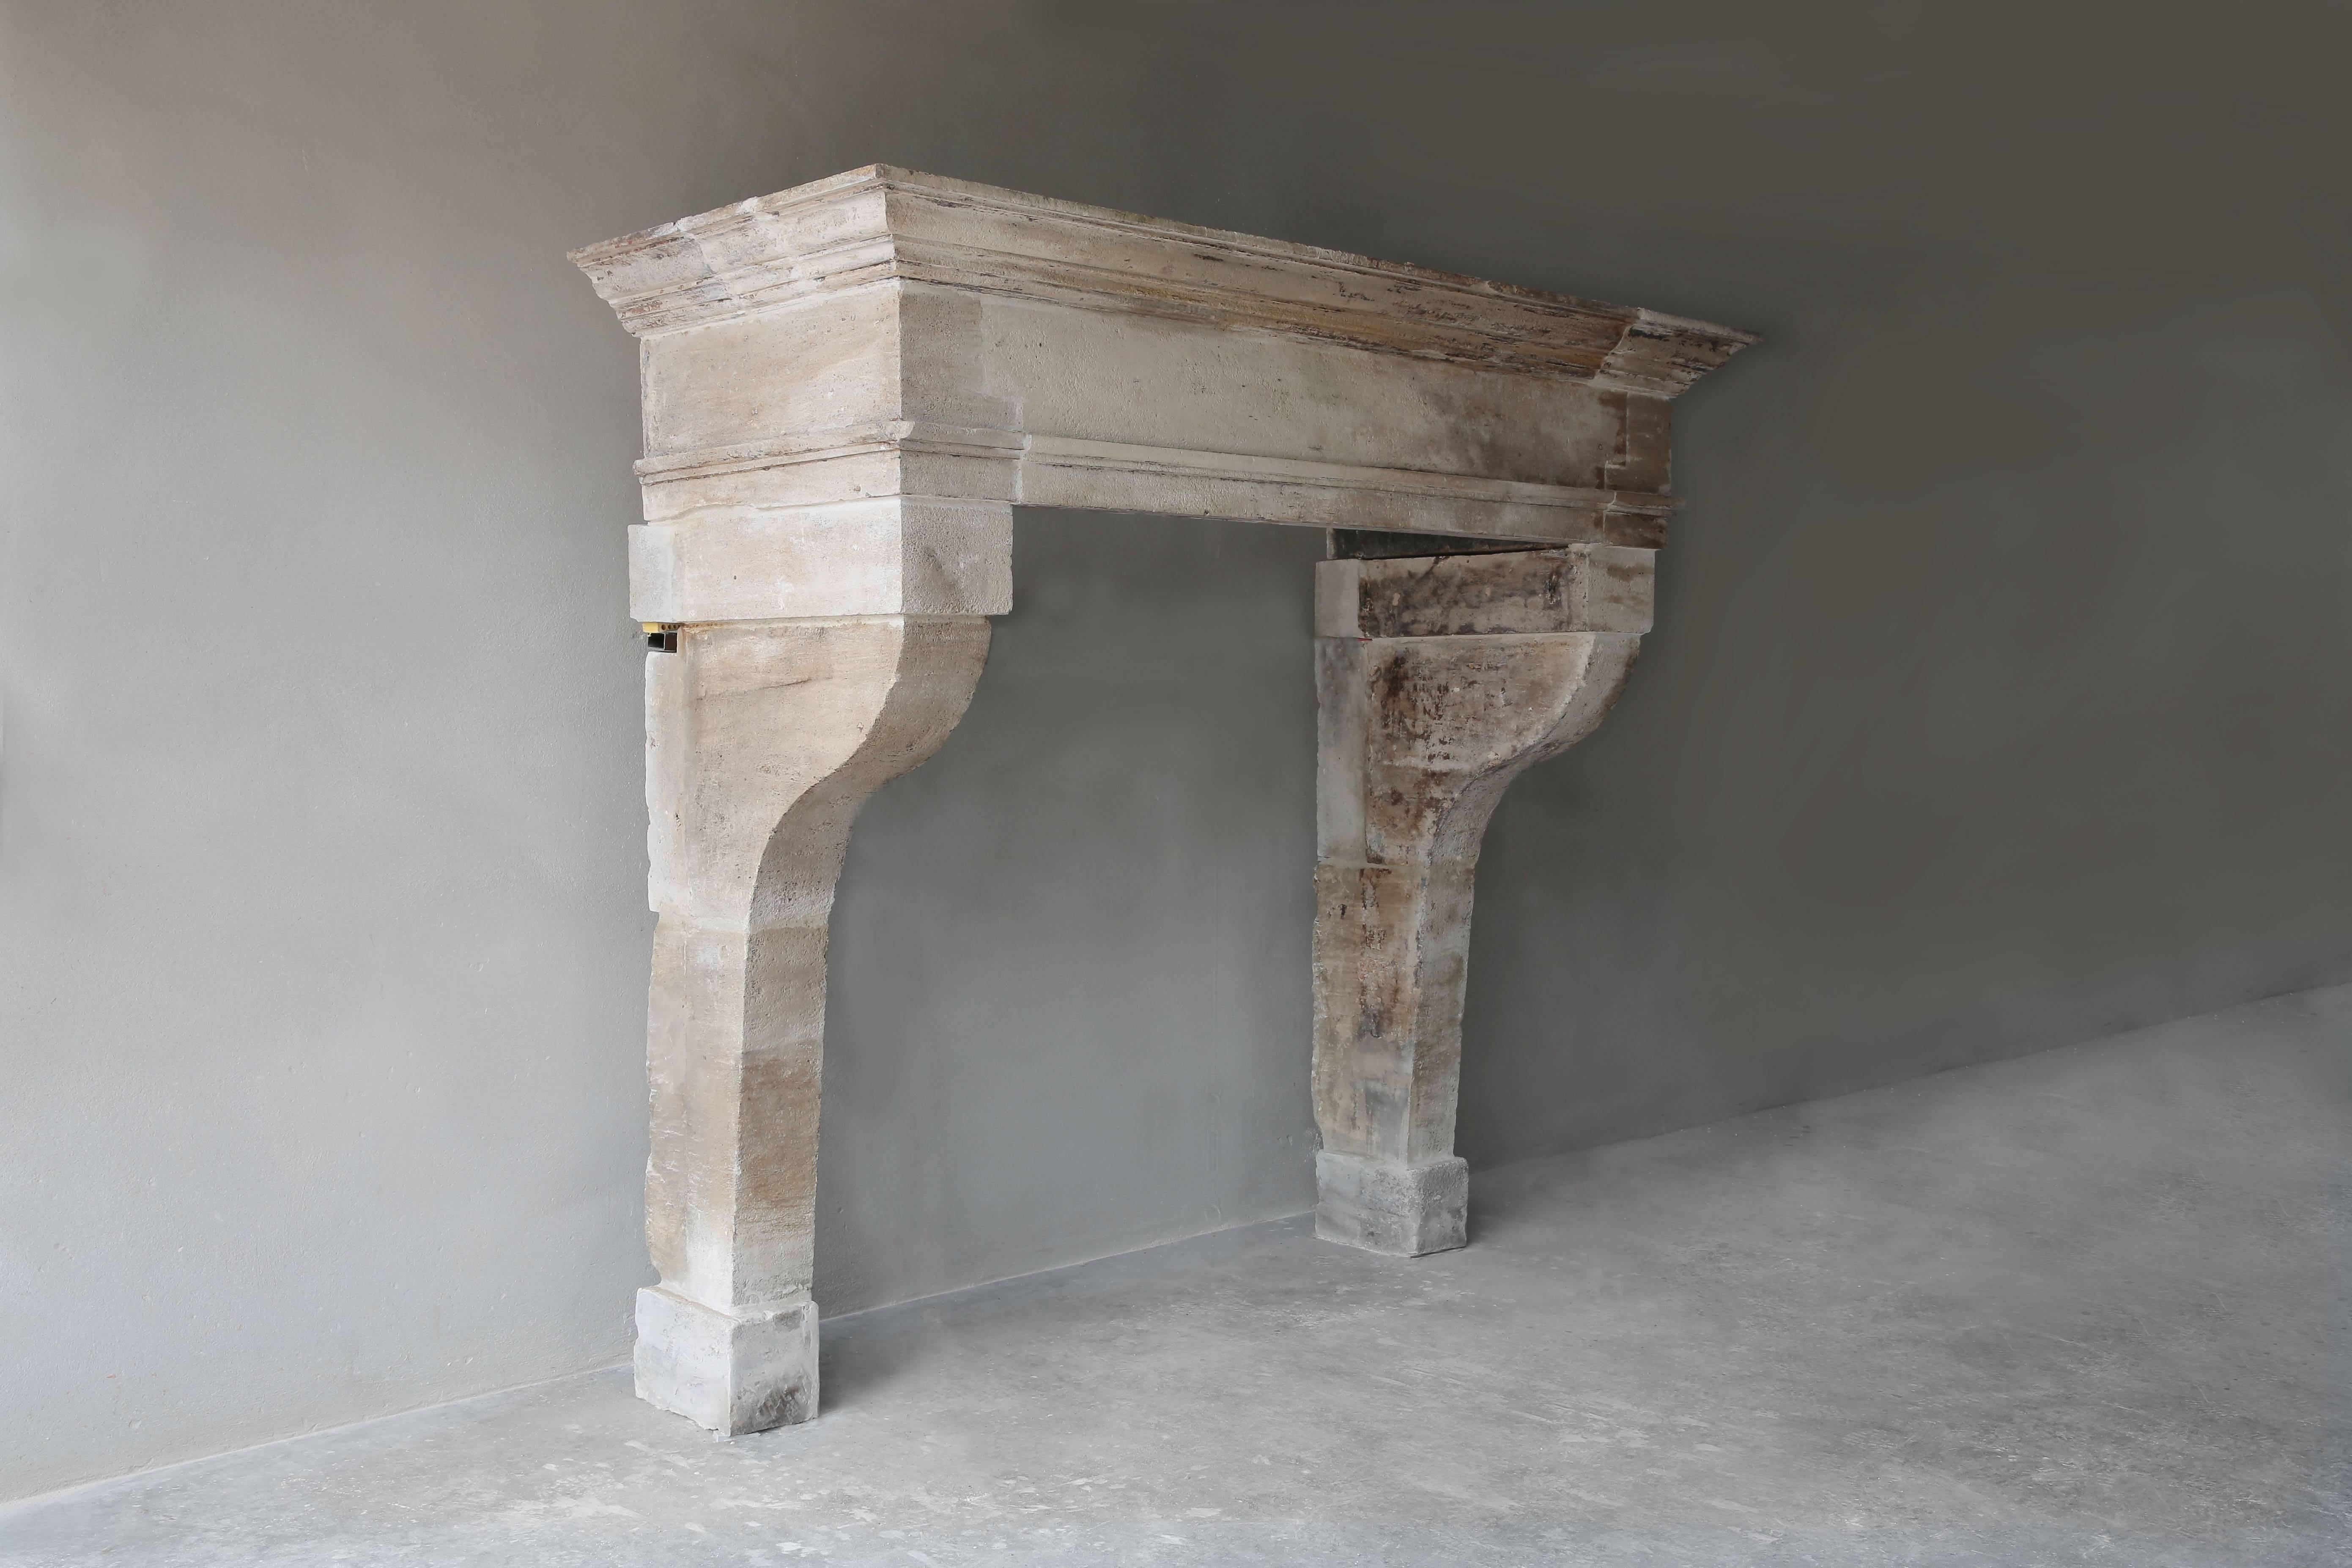 This is now a typical example of a truly robust antique fireplace that can rightly be called 'castle chimney'. A beautiful specimen with an authentic look. The cornice is no less than 14 cm high and is beautiful because of the nice shape. The legs